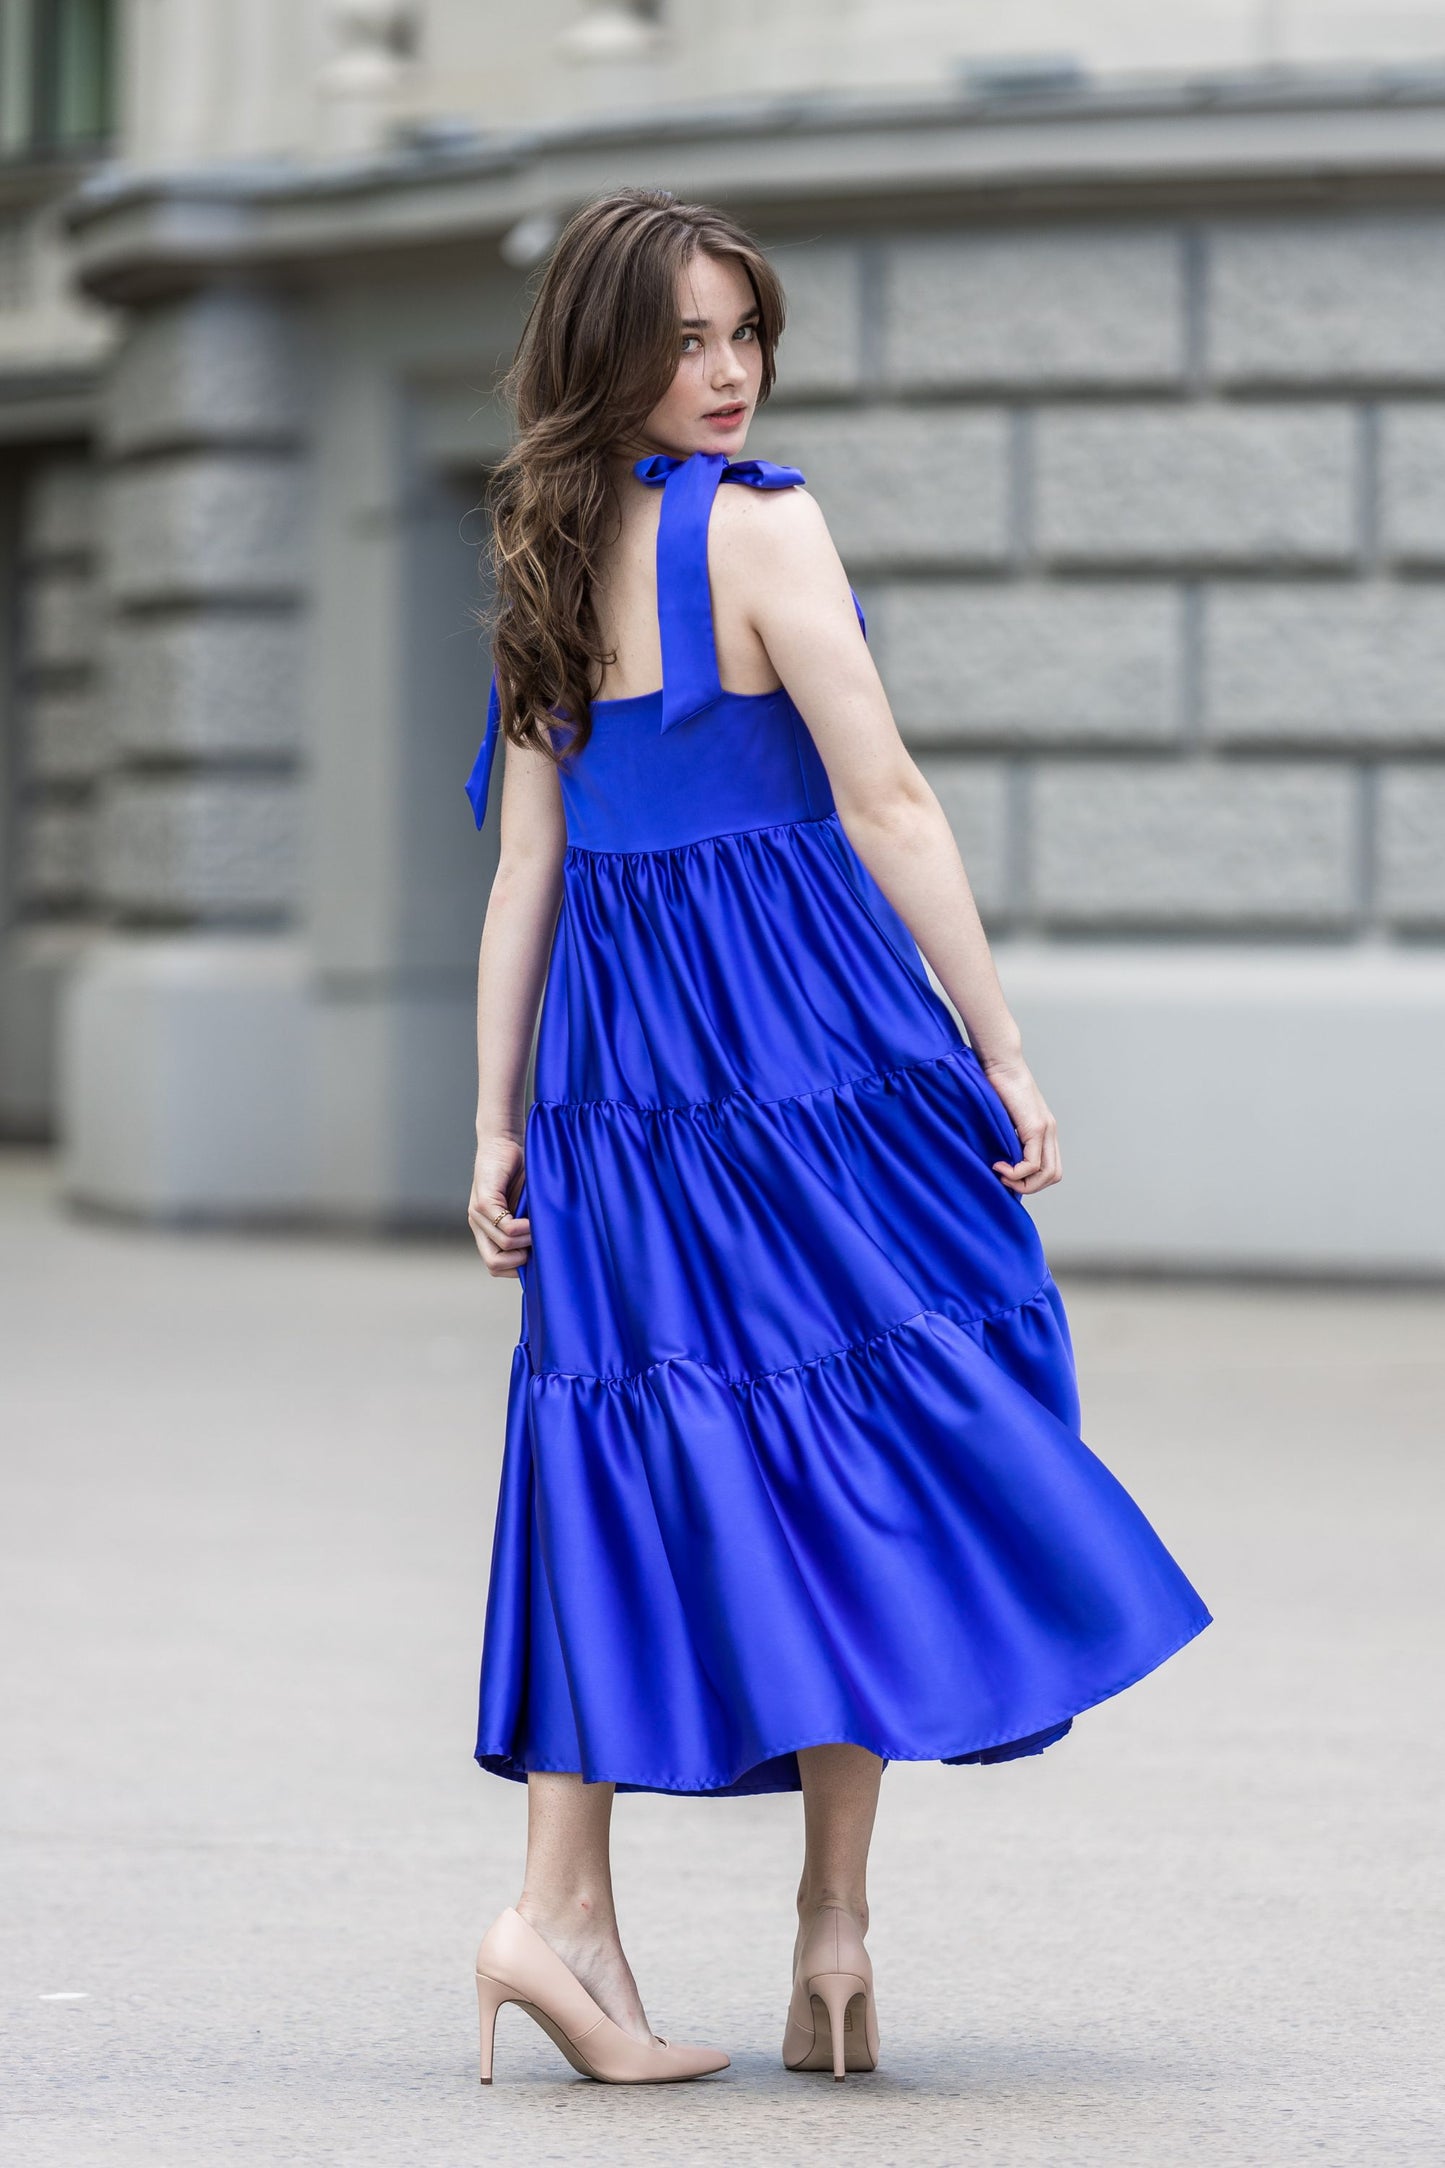 Satin dress with bows on the shoulders.